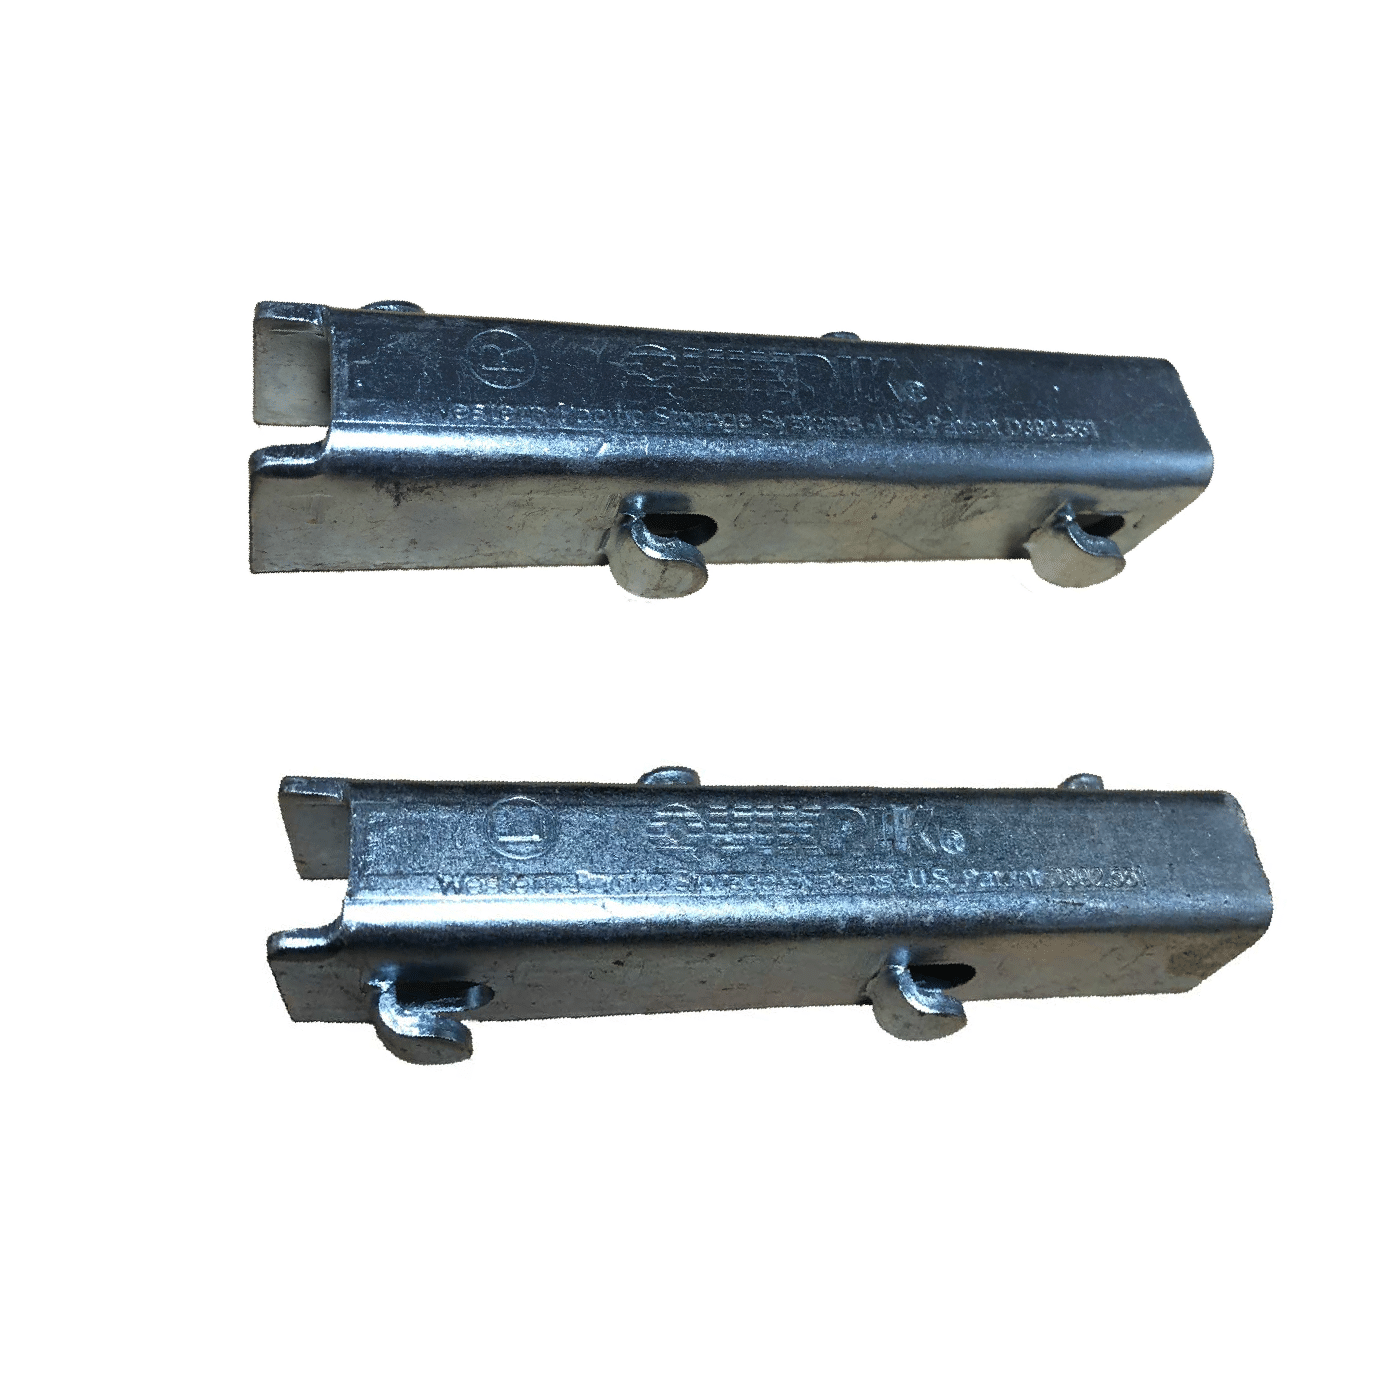 Western Pacific QuikPik Zinc Left and Right Shelf Clips